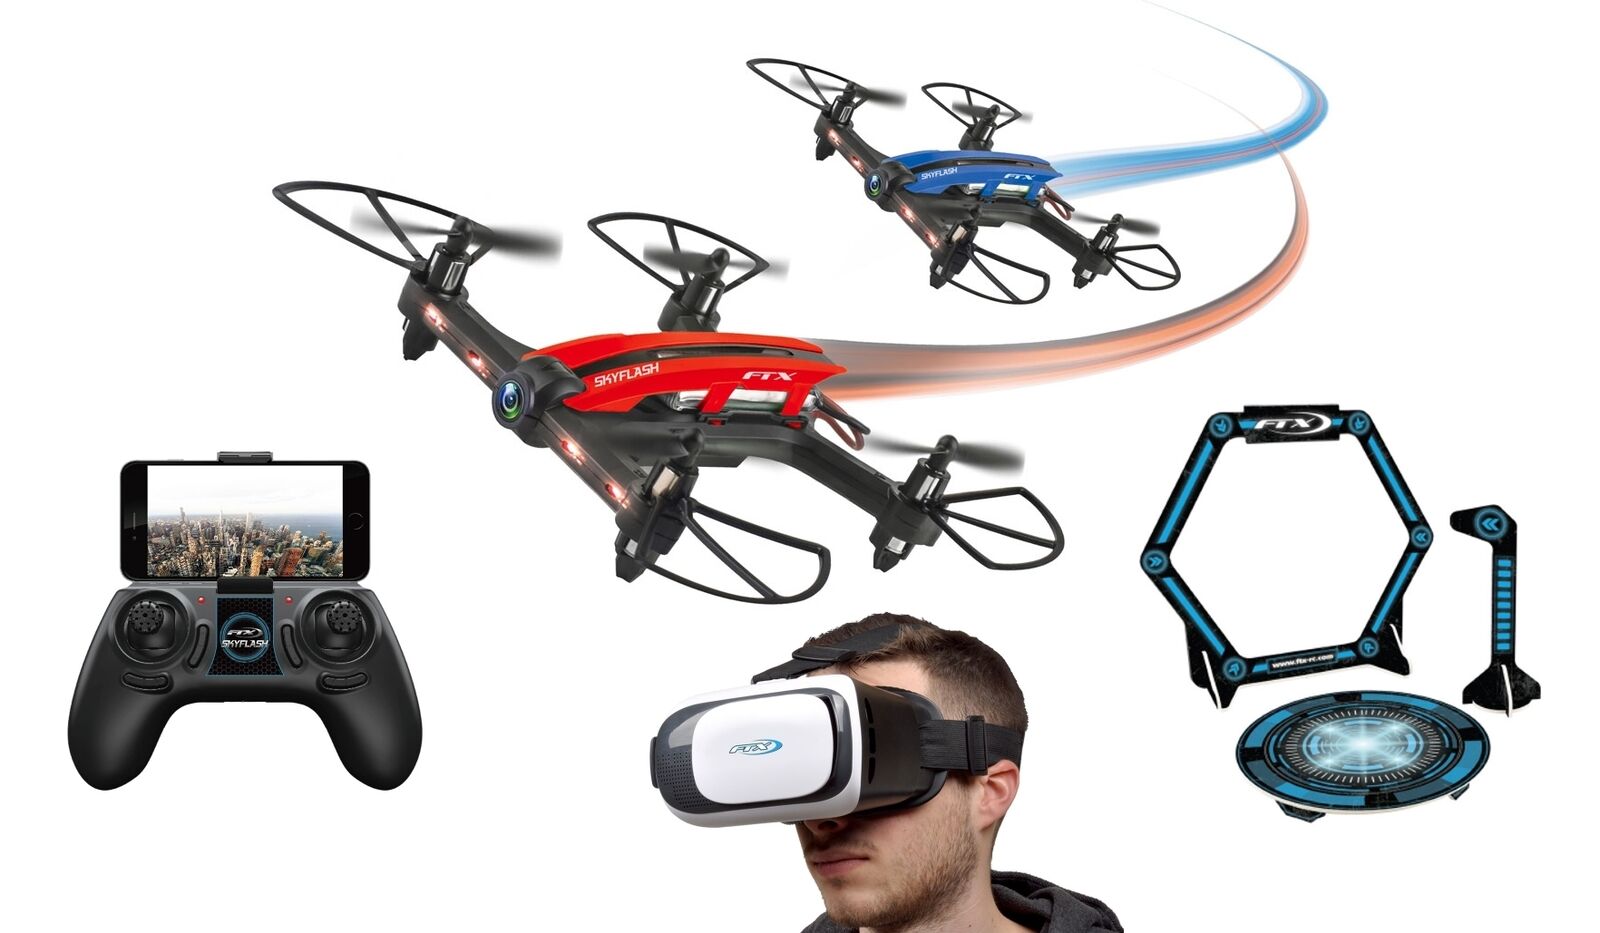 Skyflash Racing Drone Set with Goggles